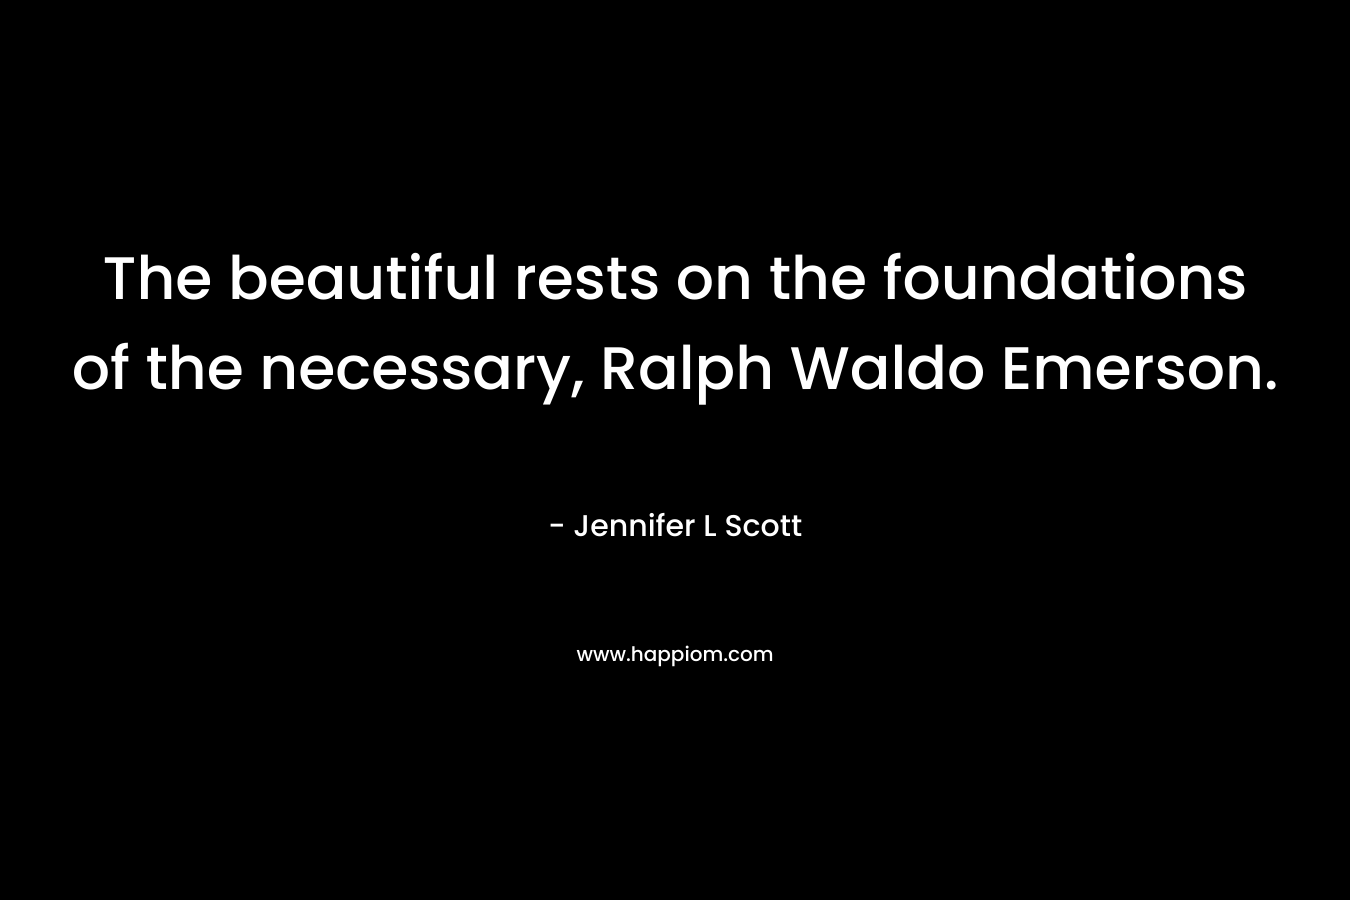 The beautiful rests on the foundations of the necessary, Ralph Waldo Emerson.